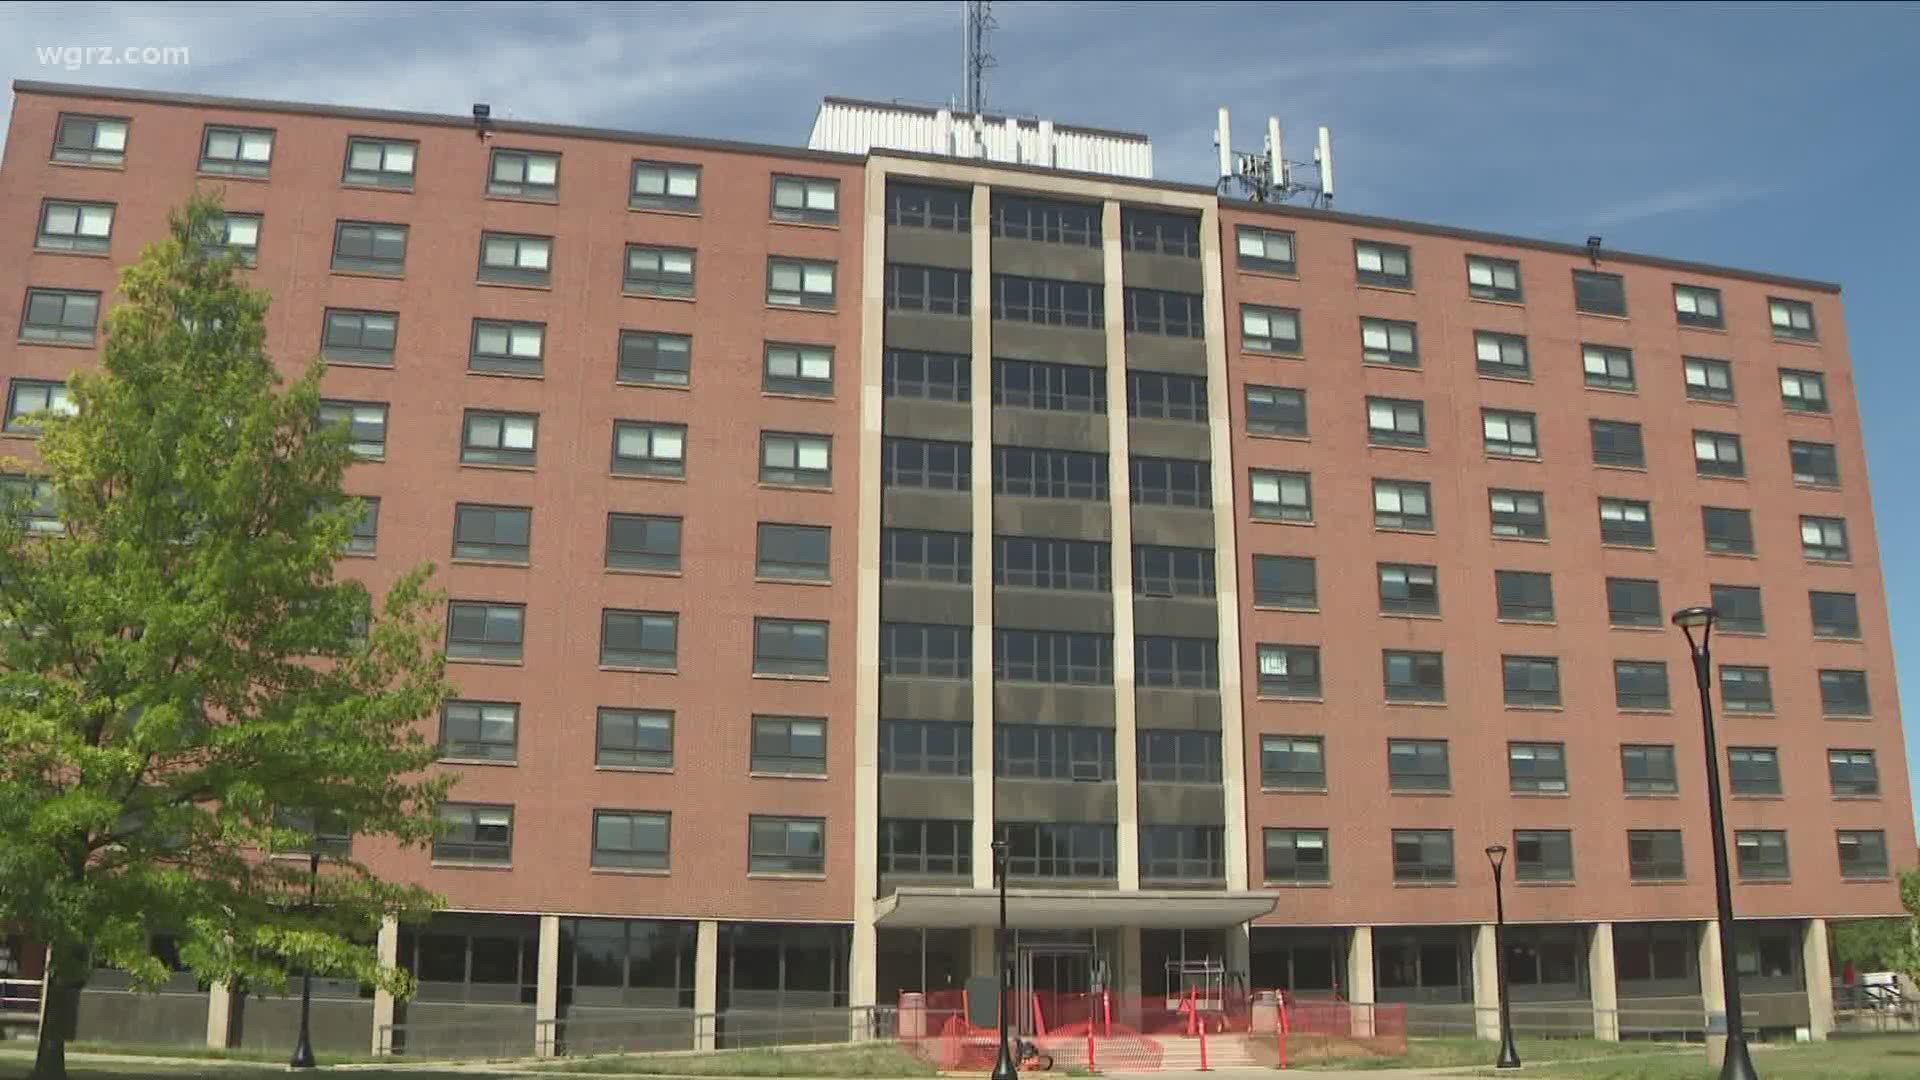 SUNY Buffalo State to begin staggered move-in for students